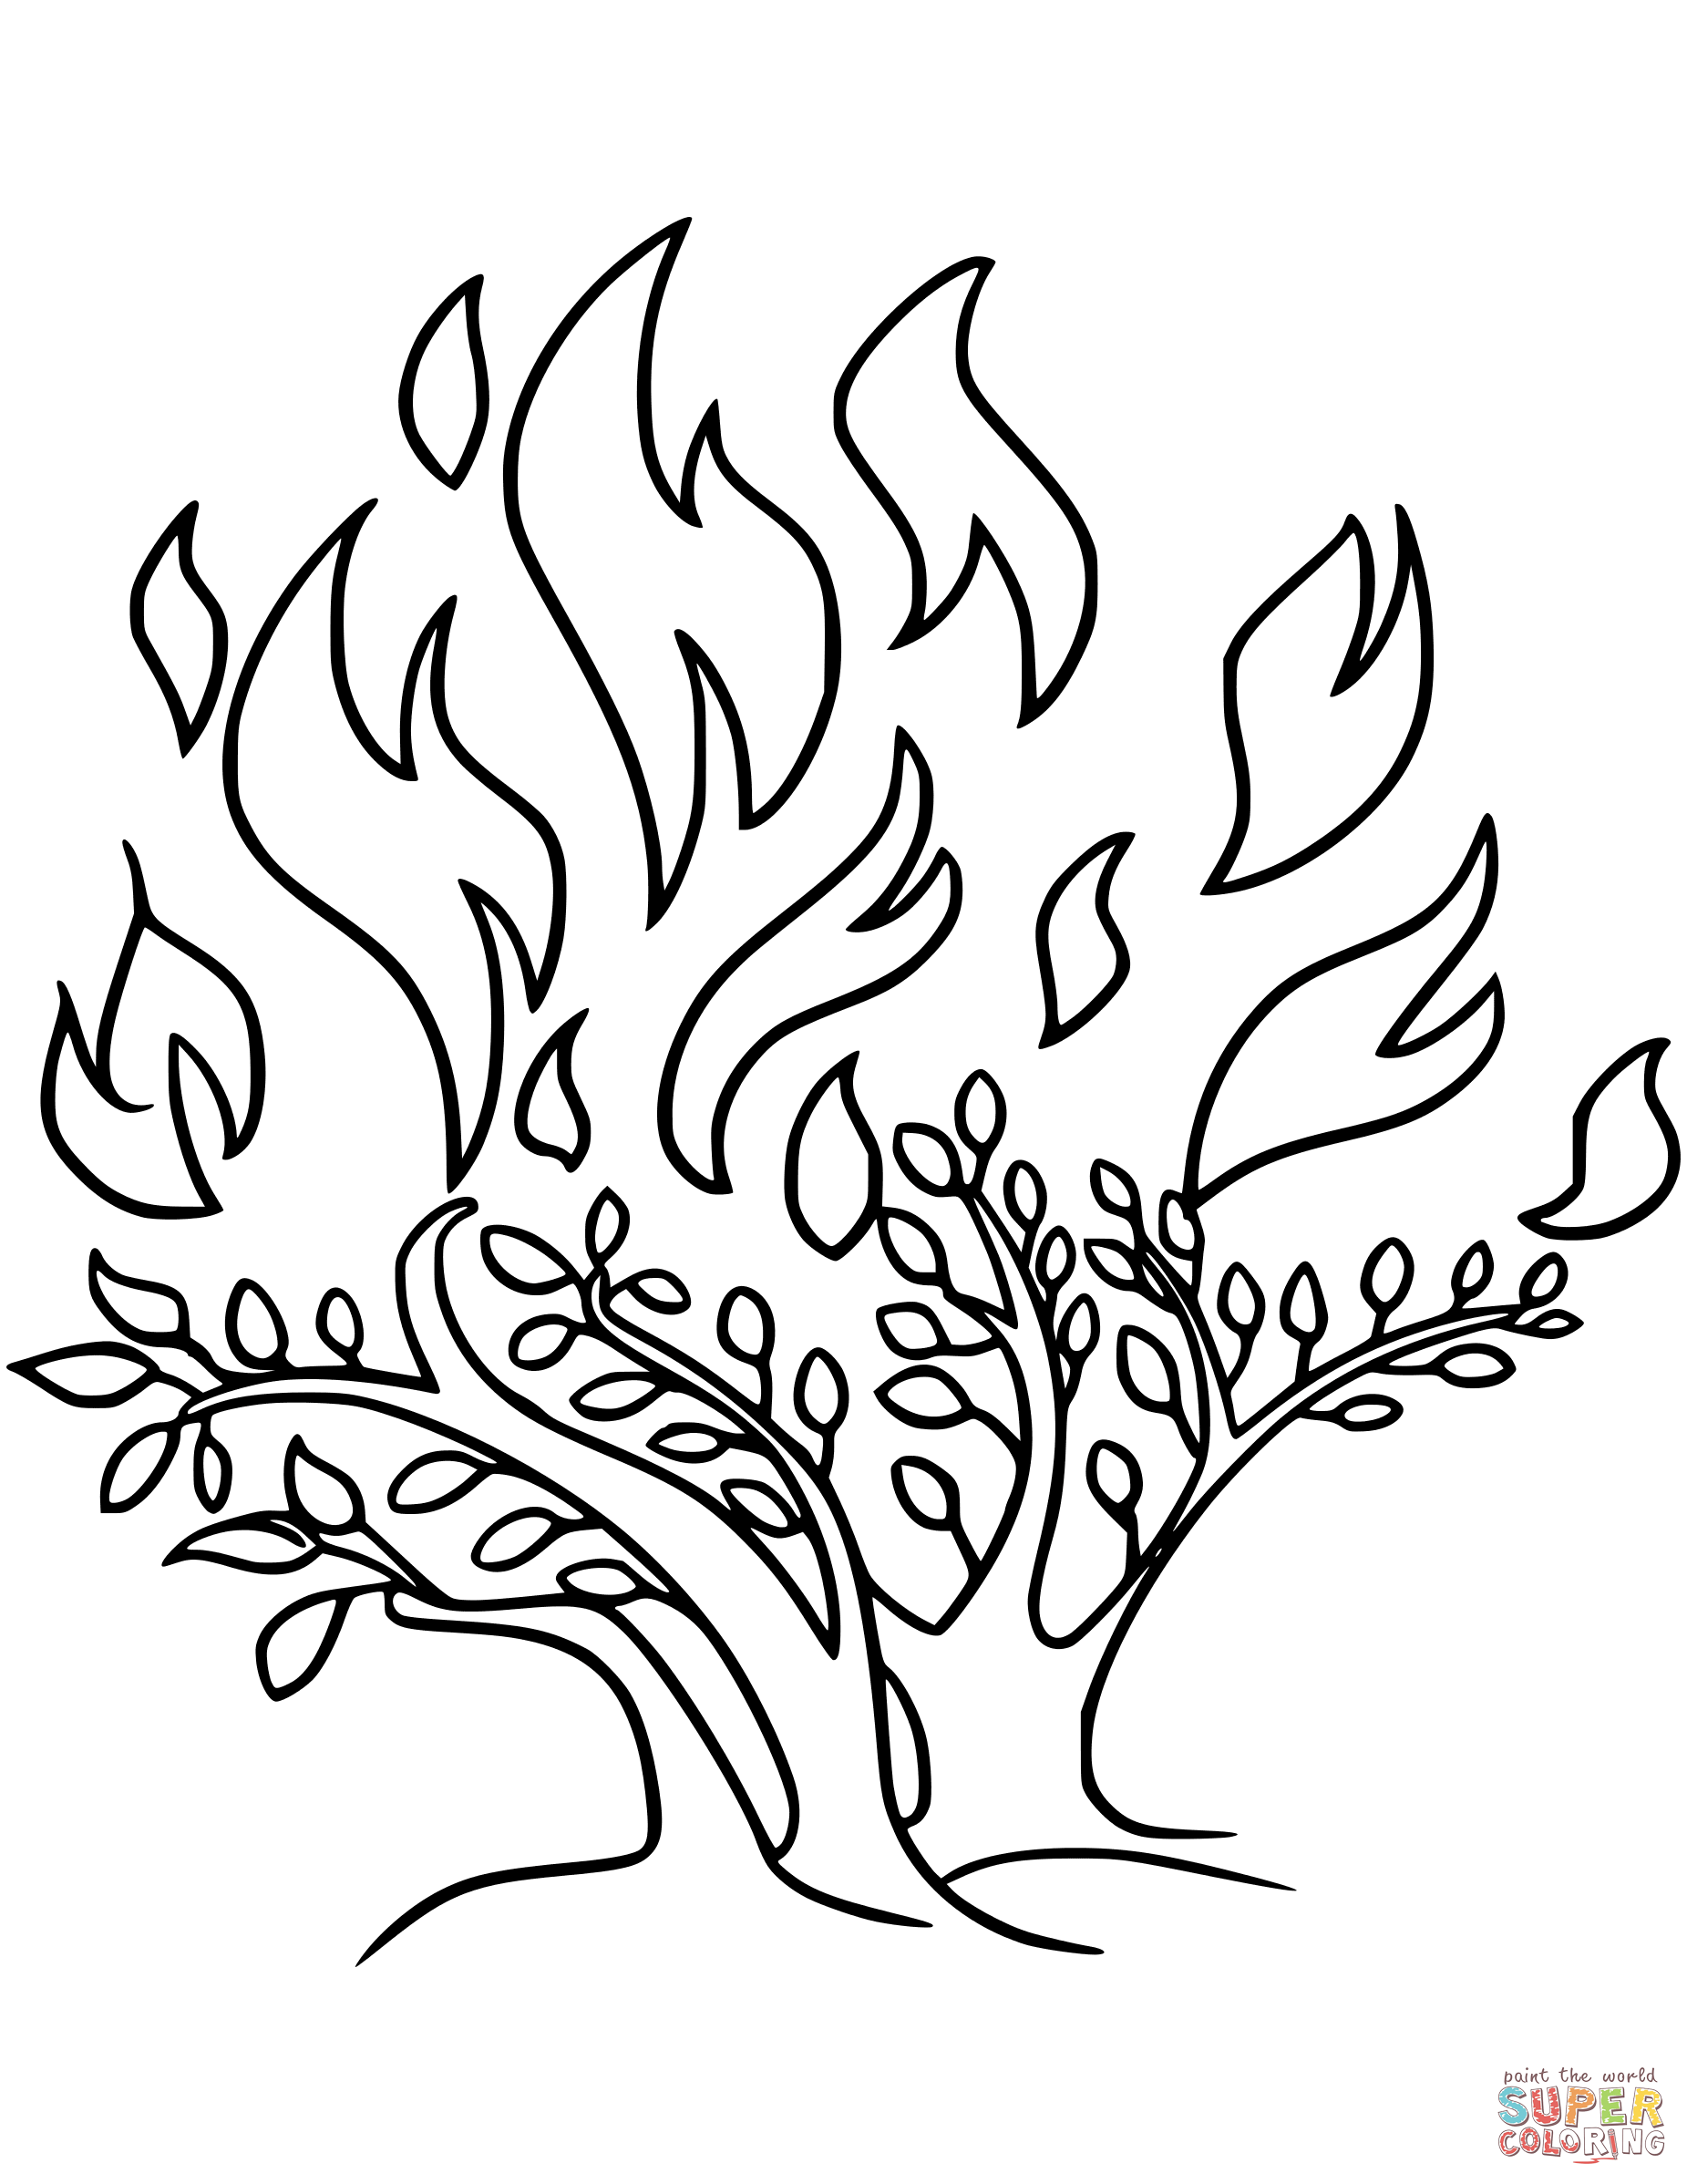 The Burning Bush Coloring Page Free Printable Coloring Pages P ginas De Colorir Da B blia B blia Sar a Ardente